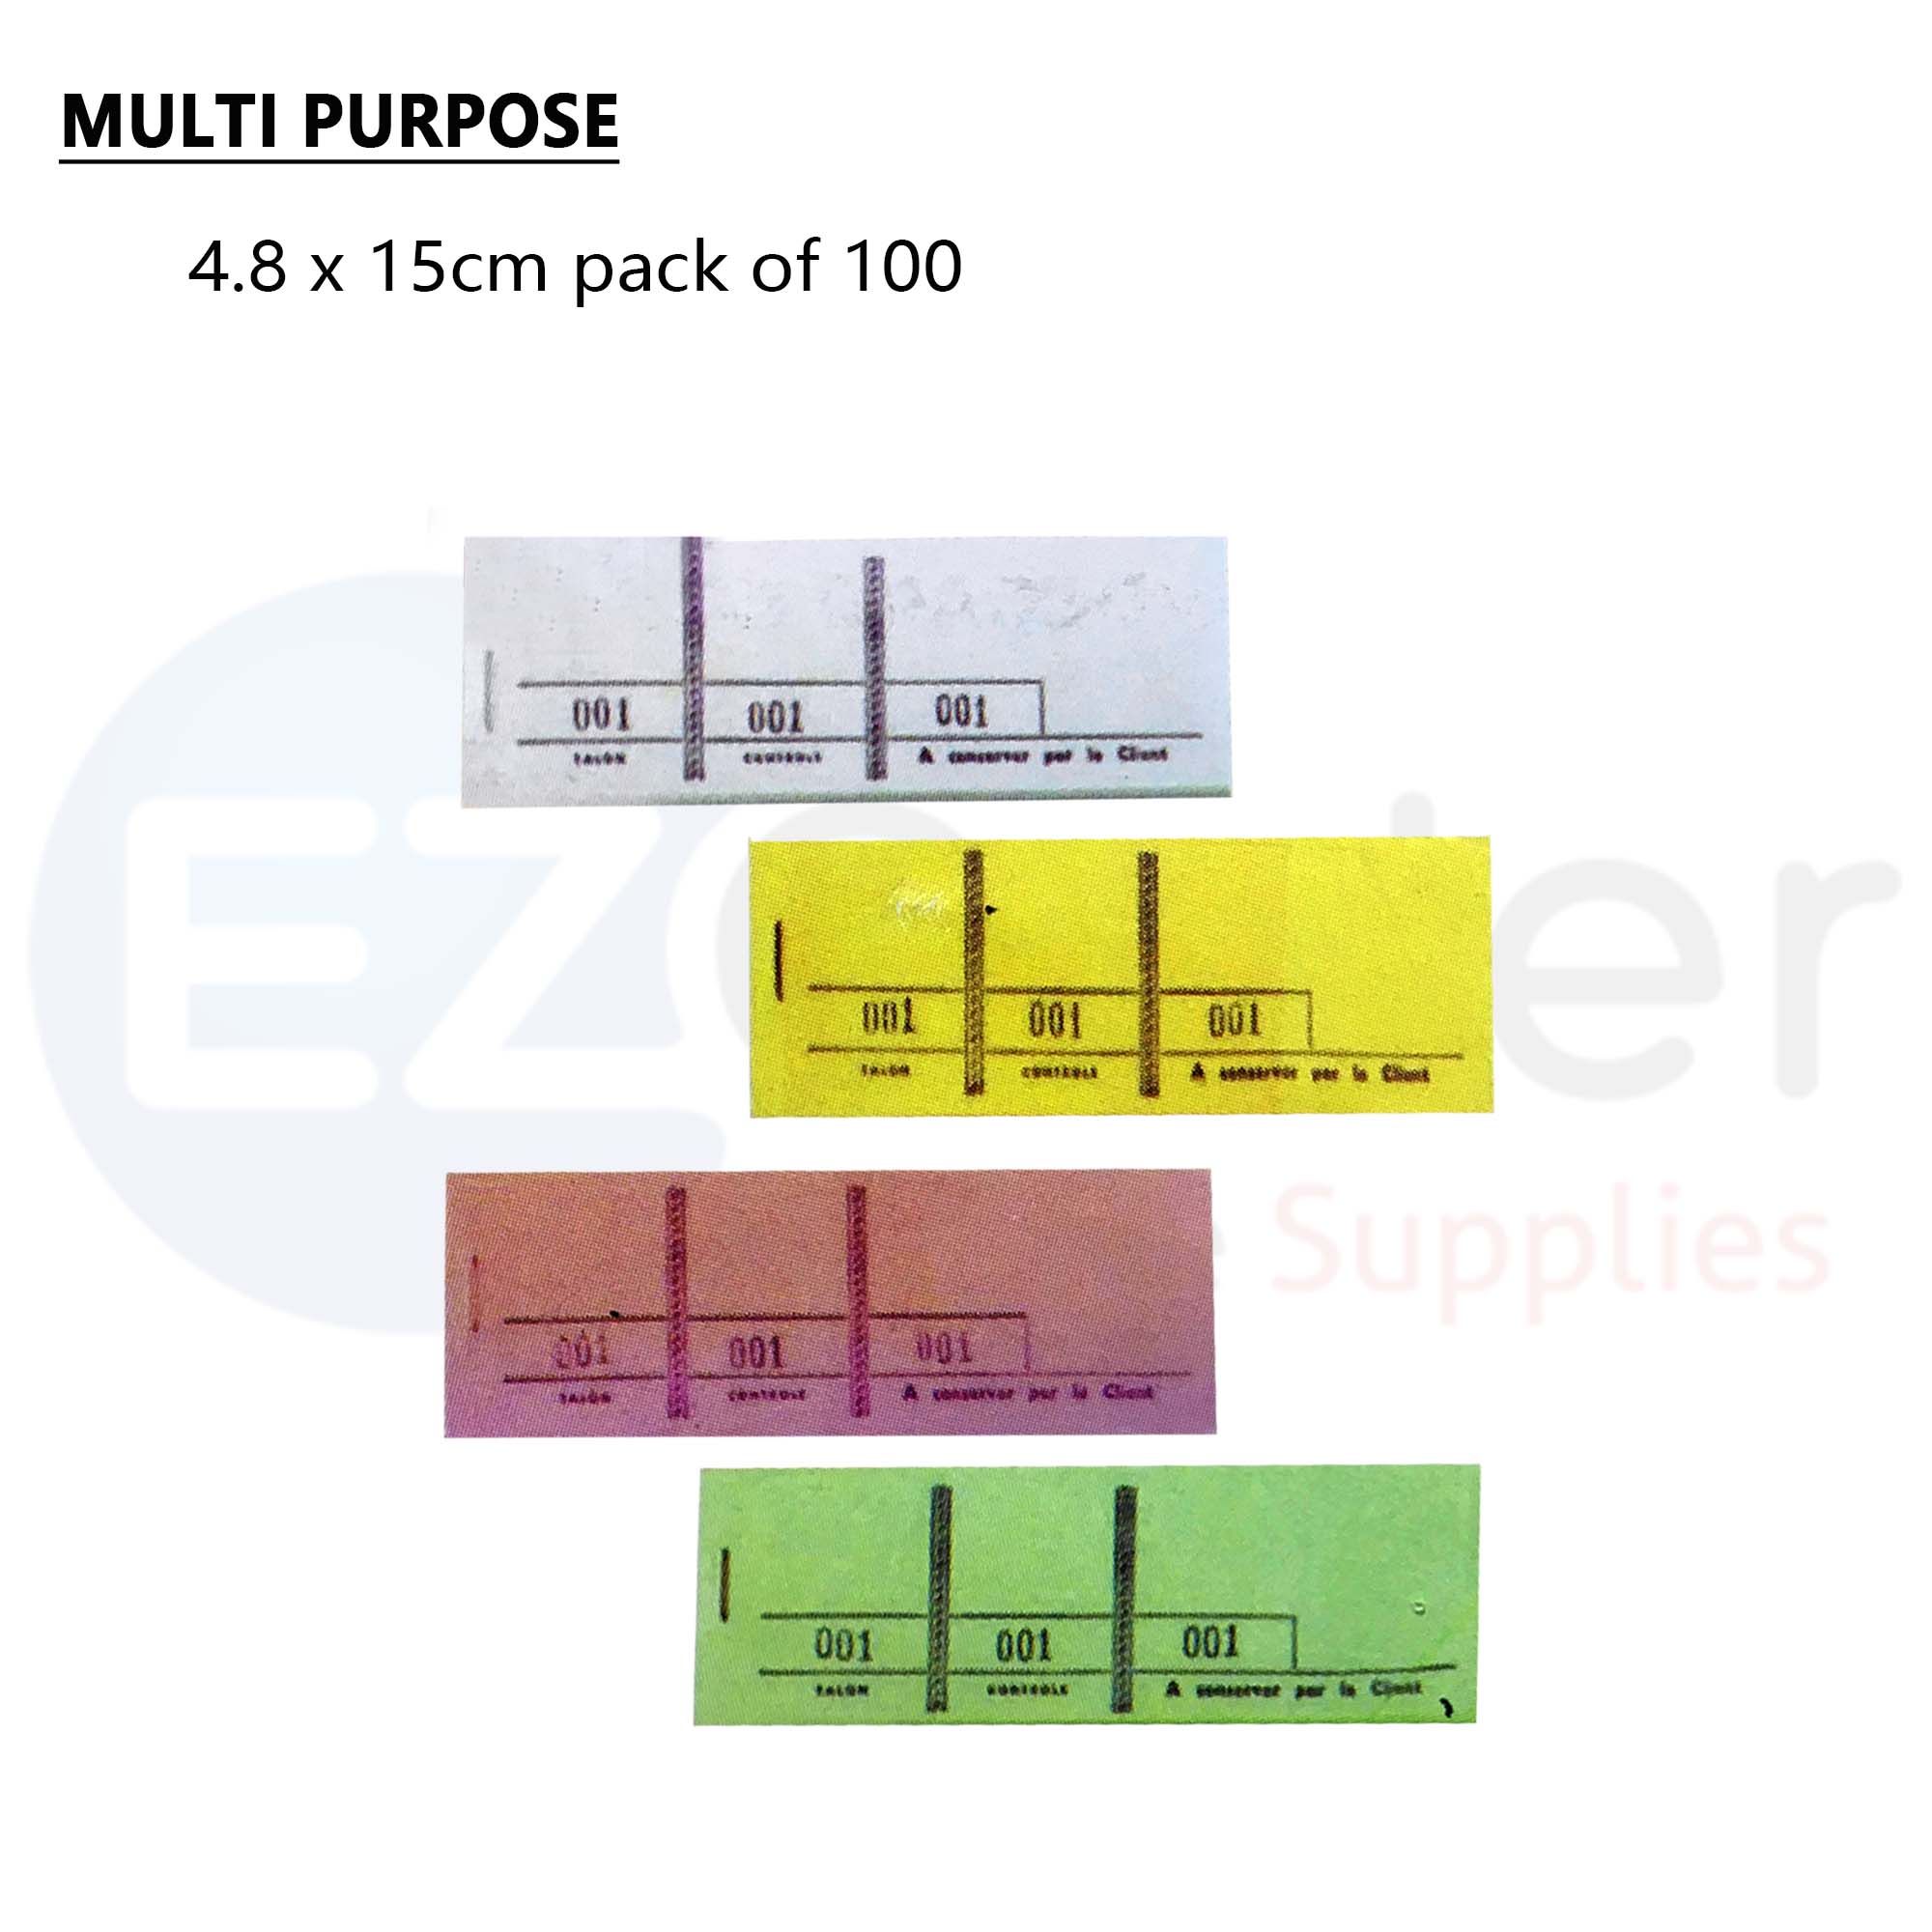 MULTIPURPOSE 3 colors parts pad for parking